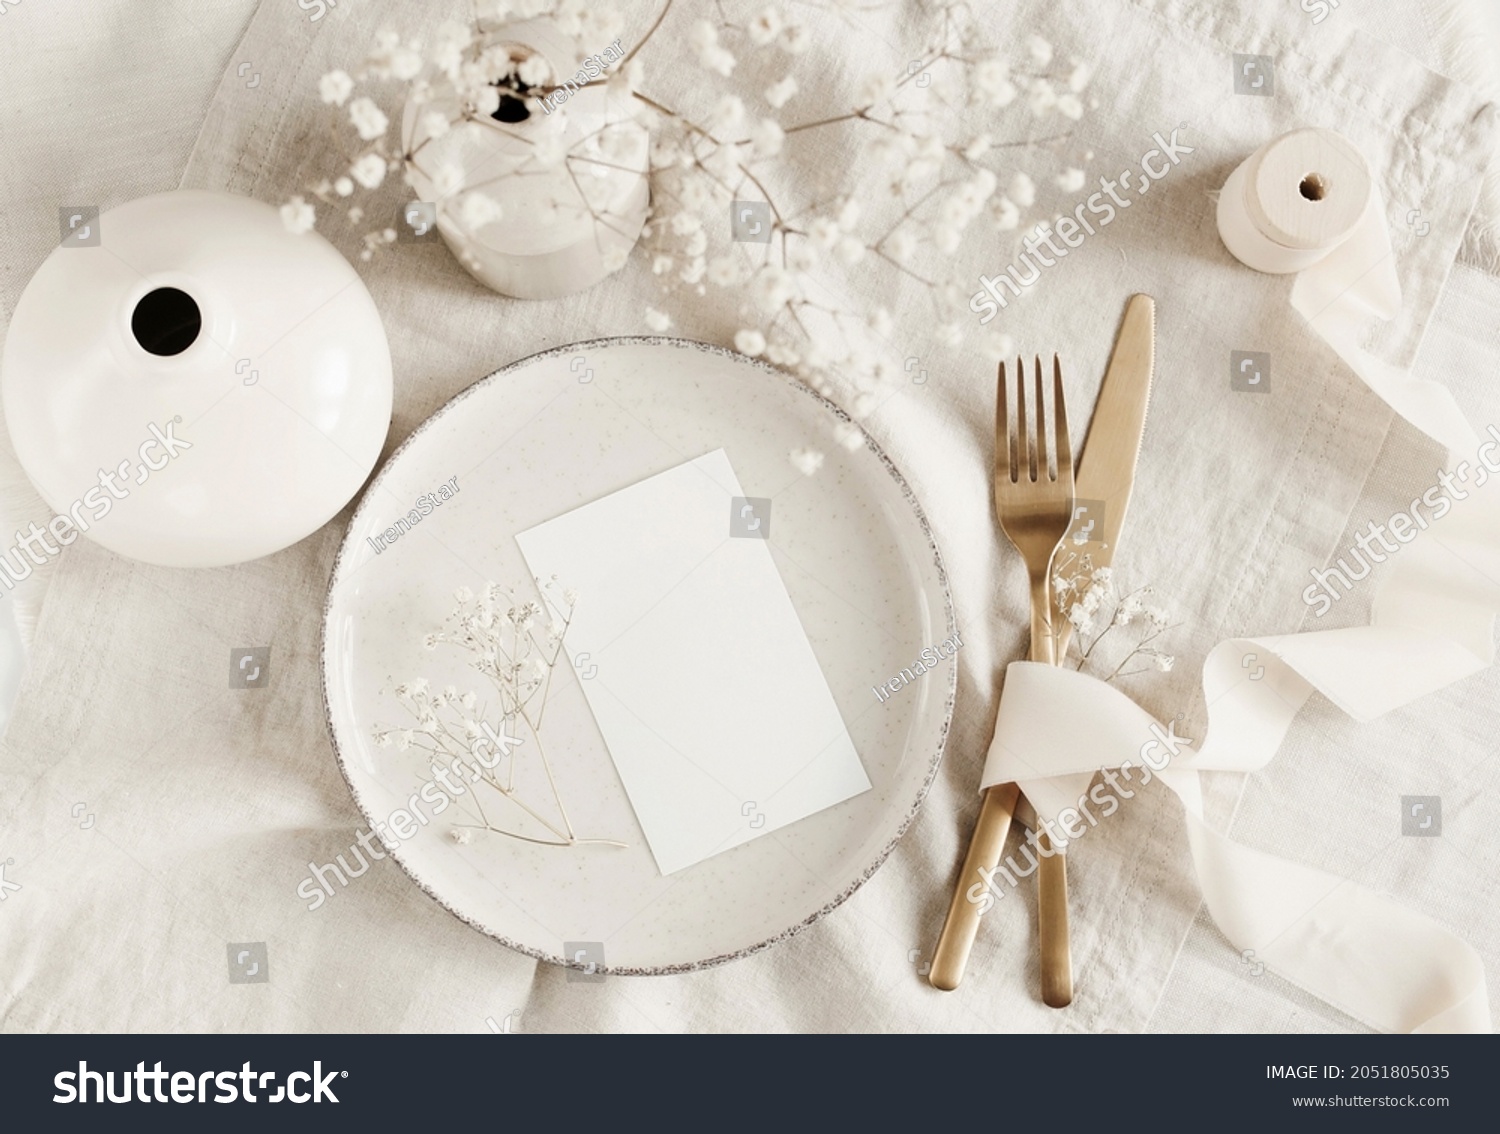 Blank paper sheet card mockup on minimal table place setting top view on beige linen tablecloth.  Space for text. Wedding invitation, menu. Scandinavian style. #2051805035